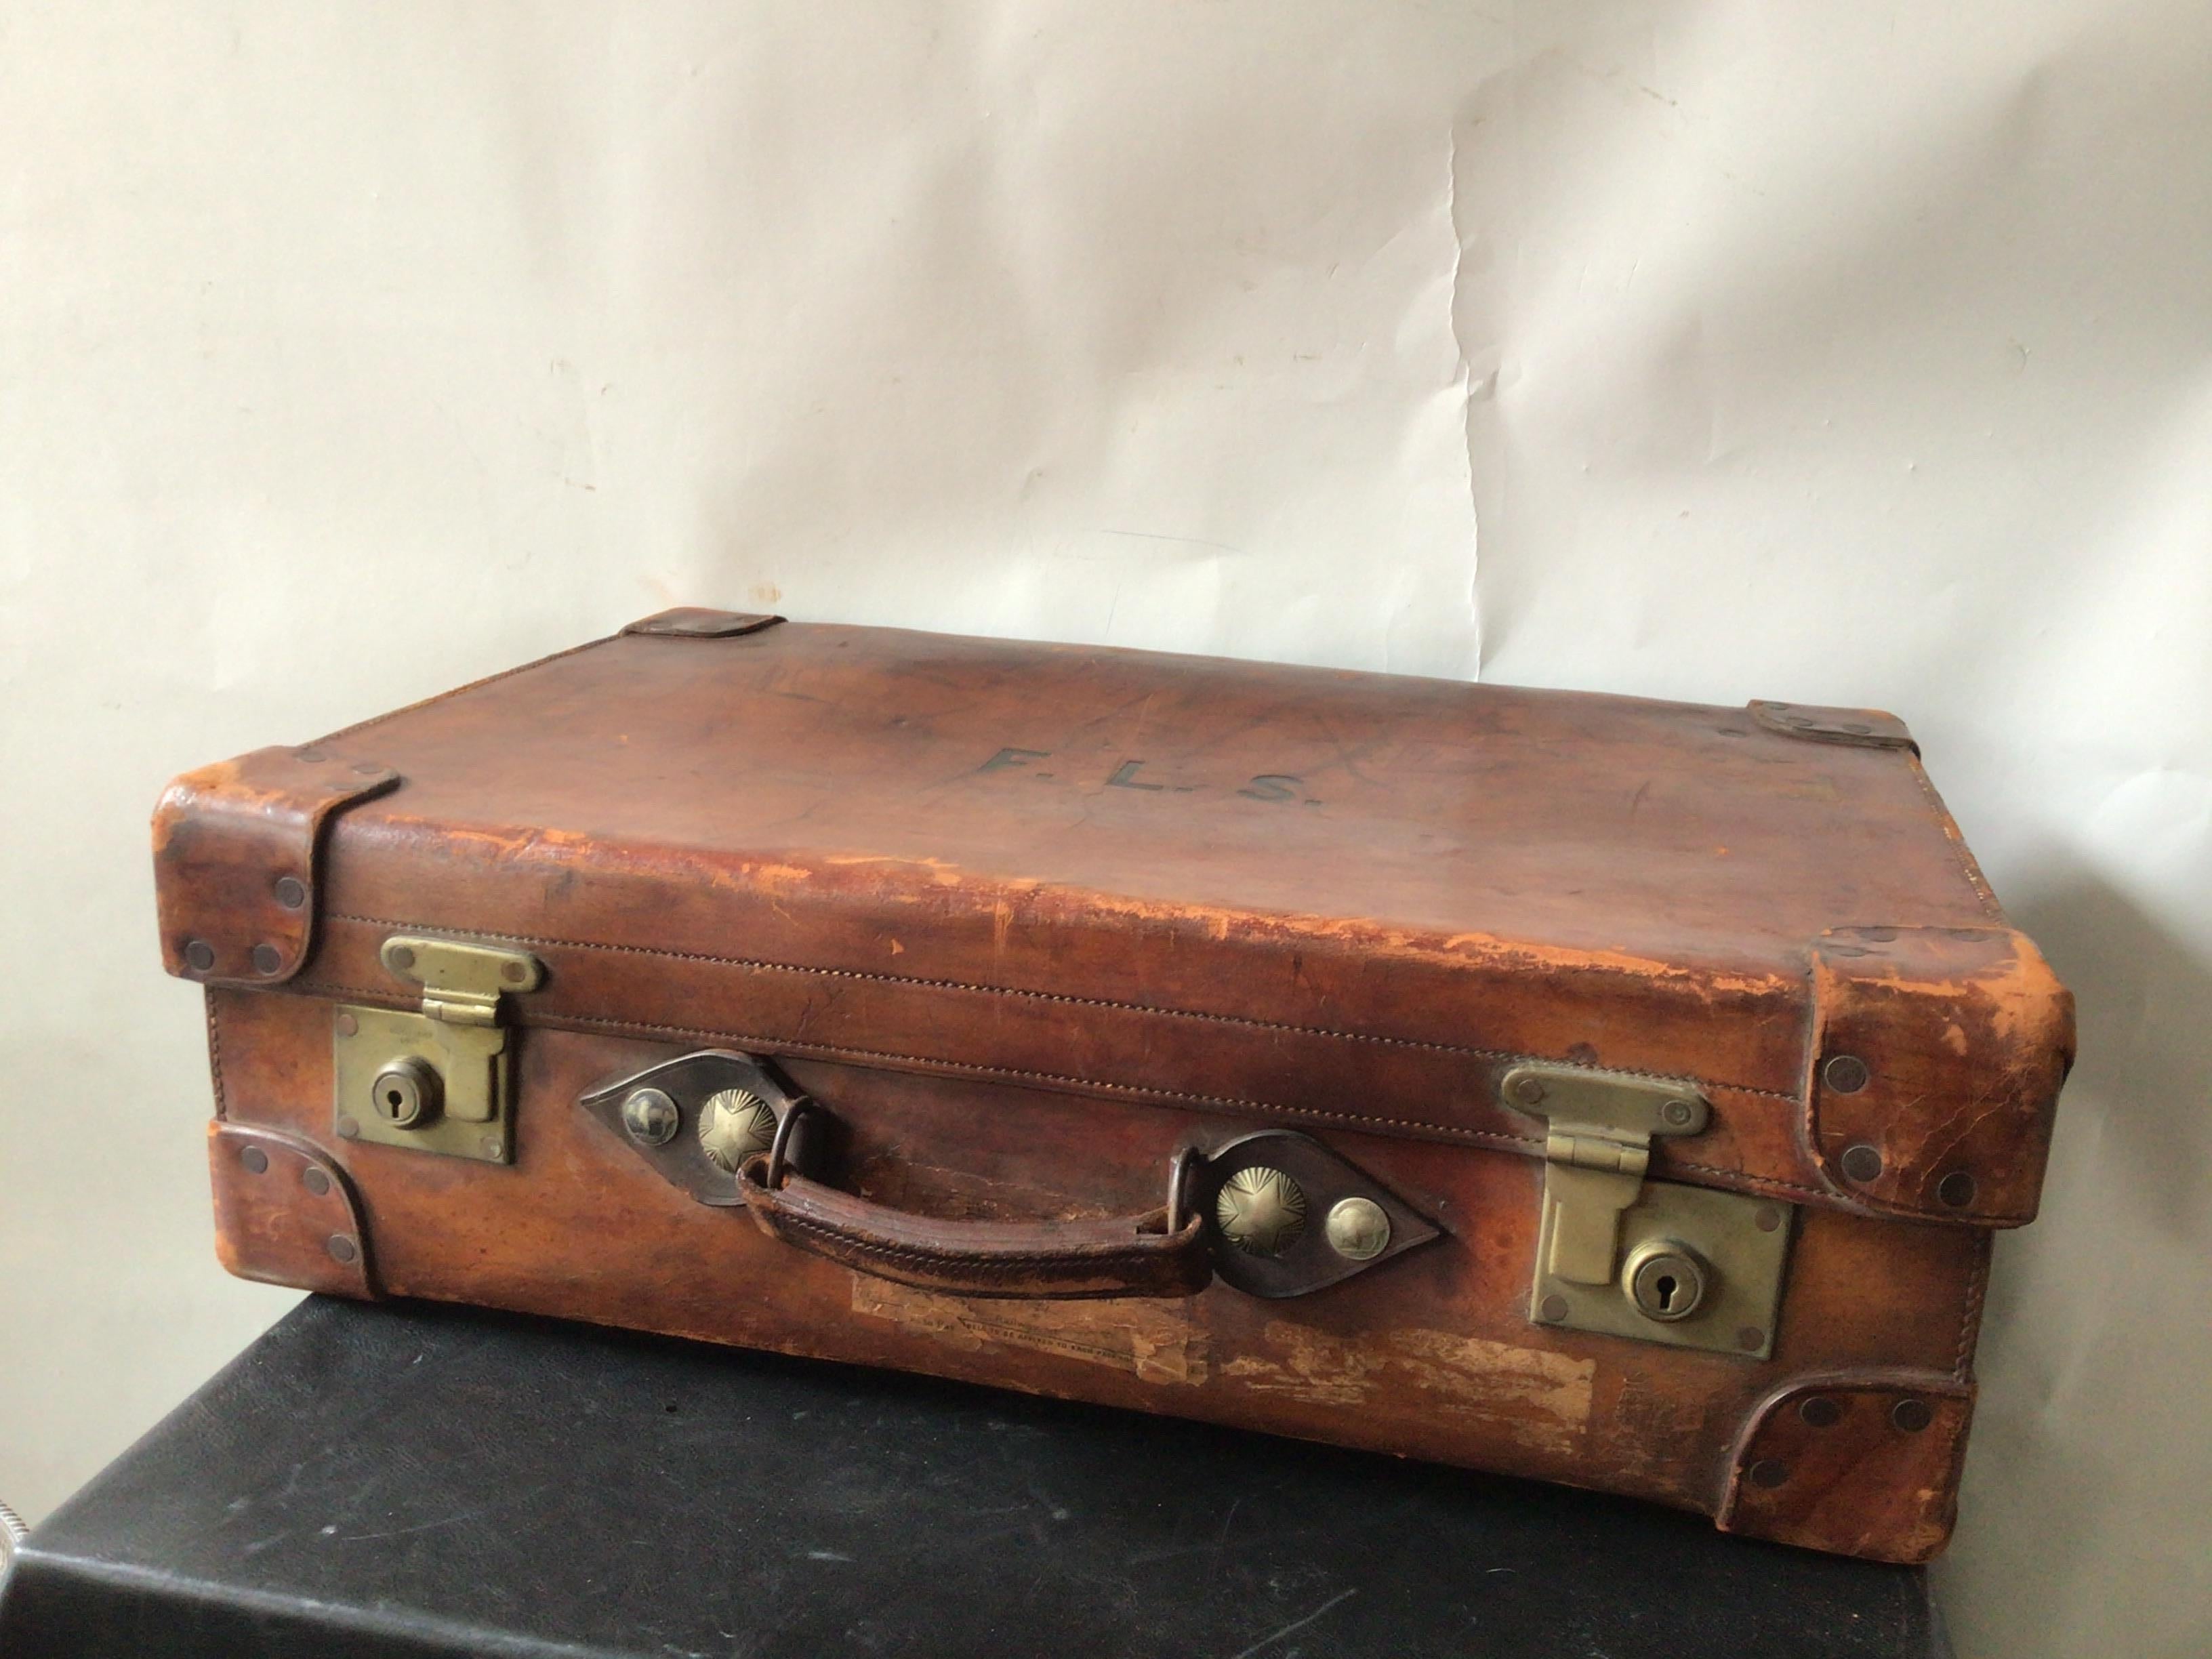 1910 English leather suitcase by Walker and Hall.